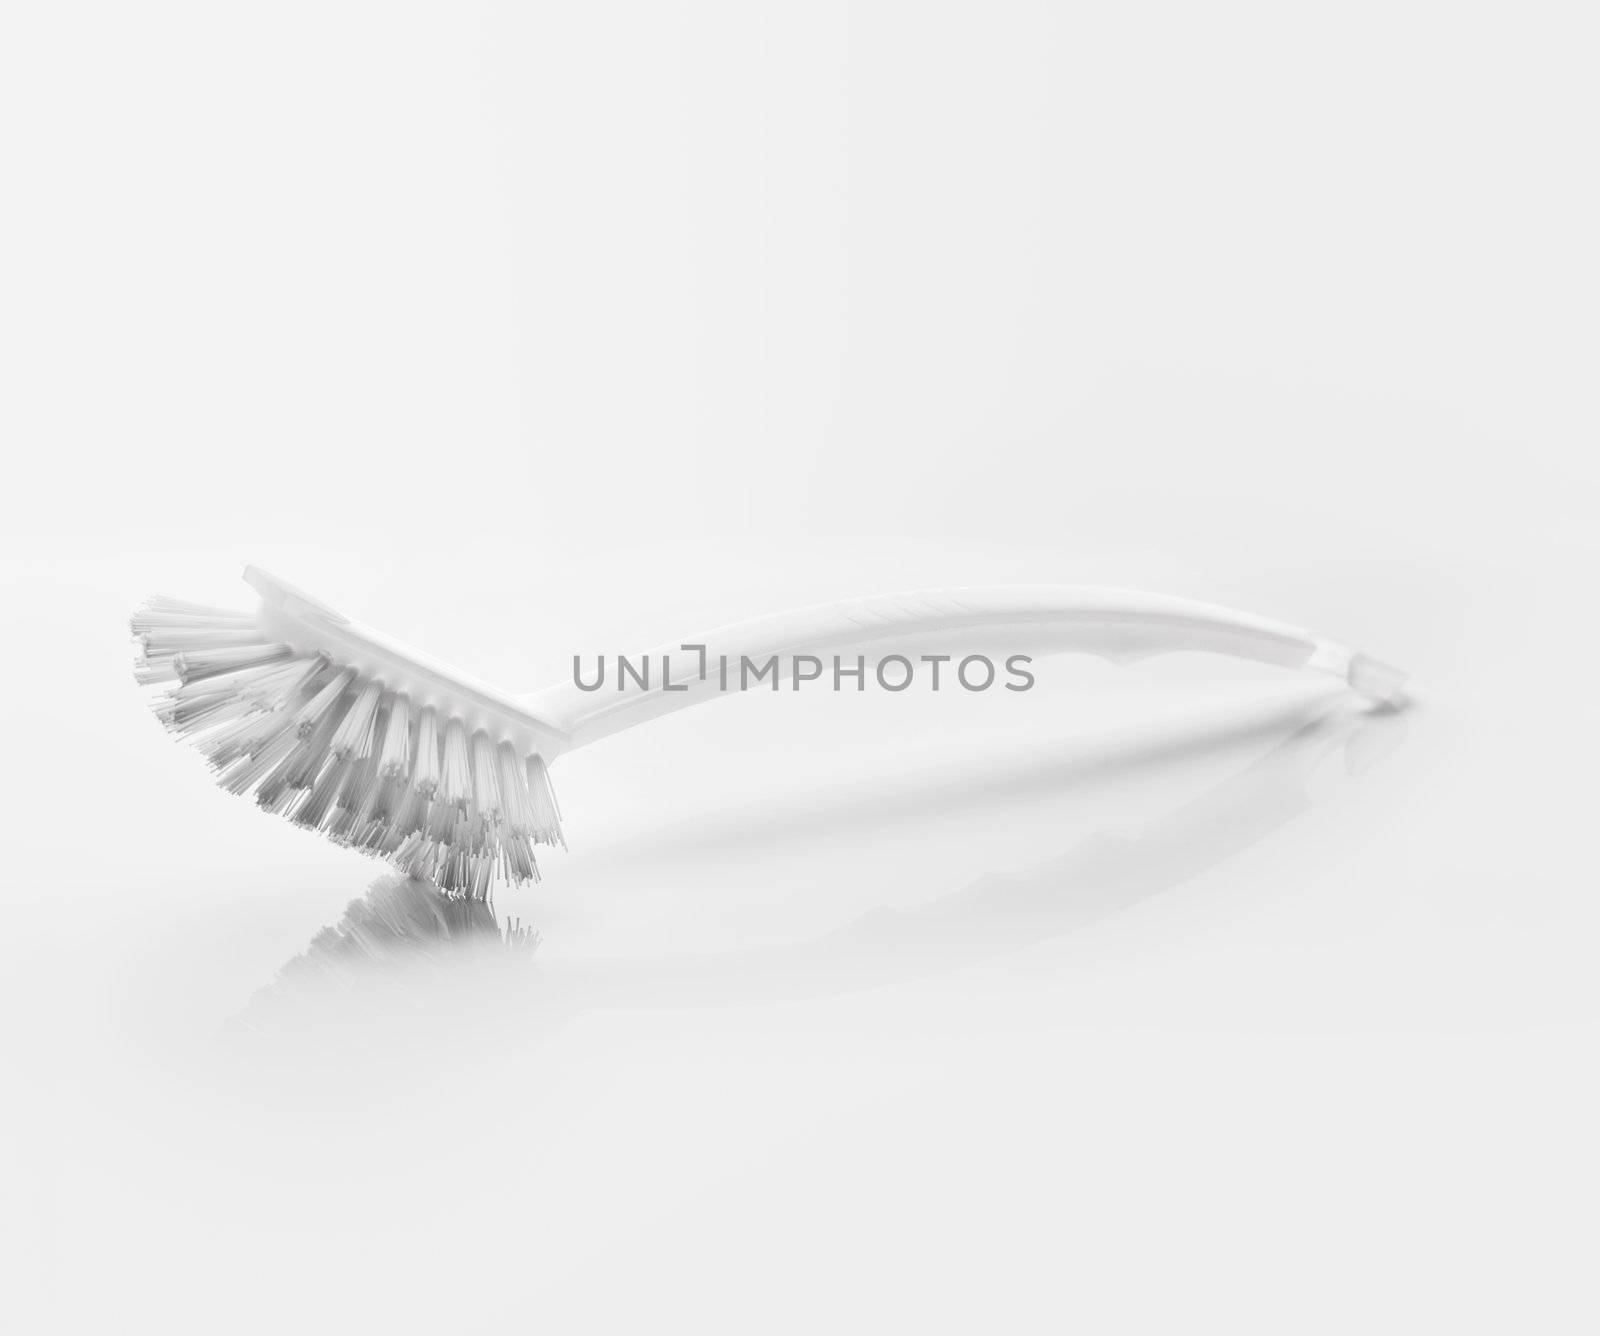 Dish brush by Stocksnapper